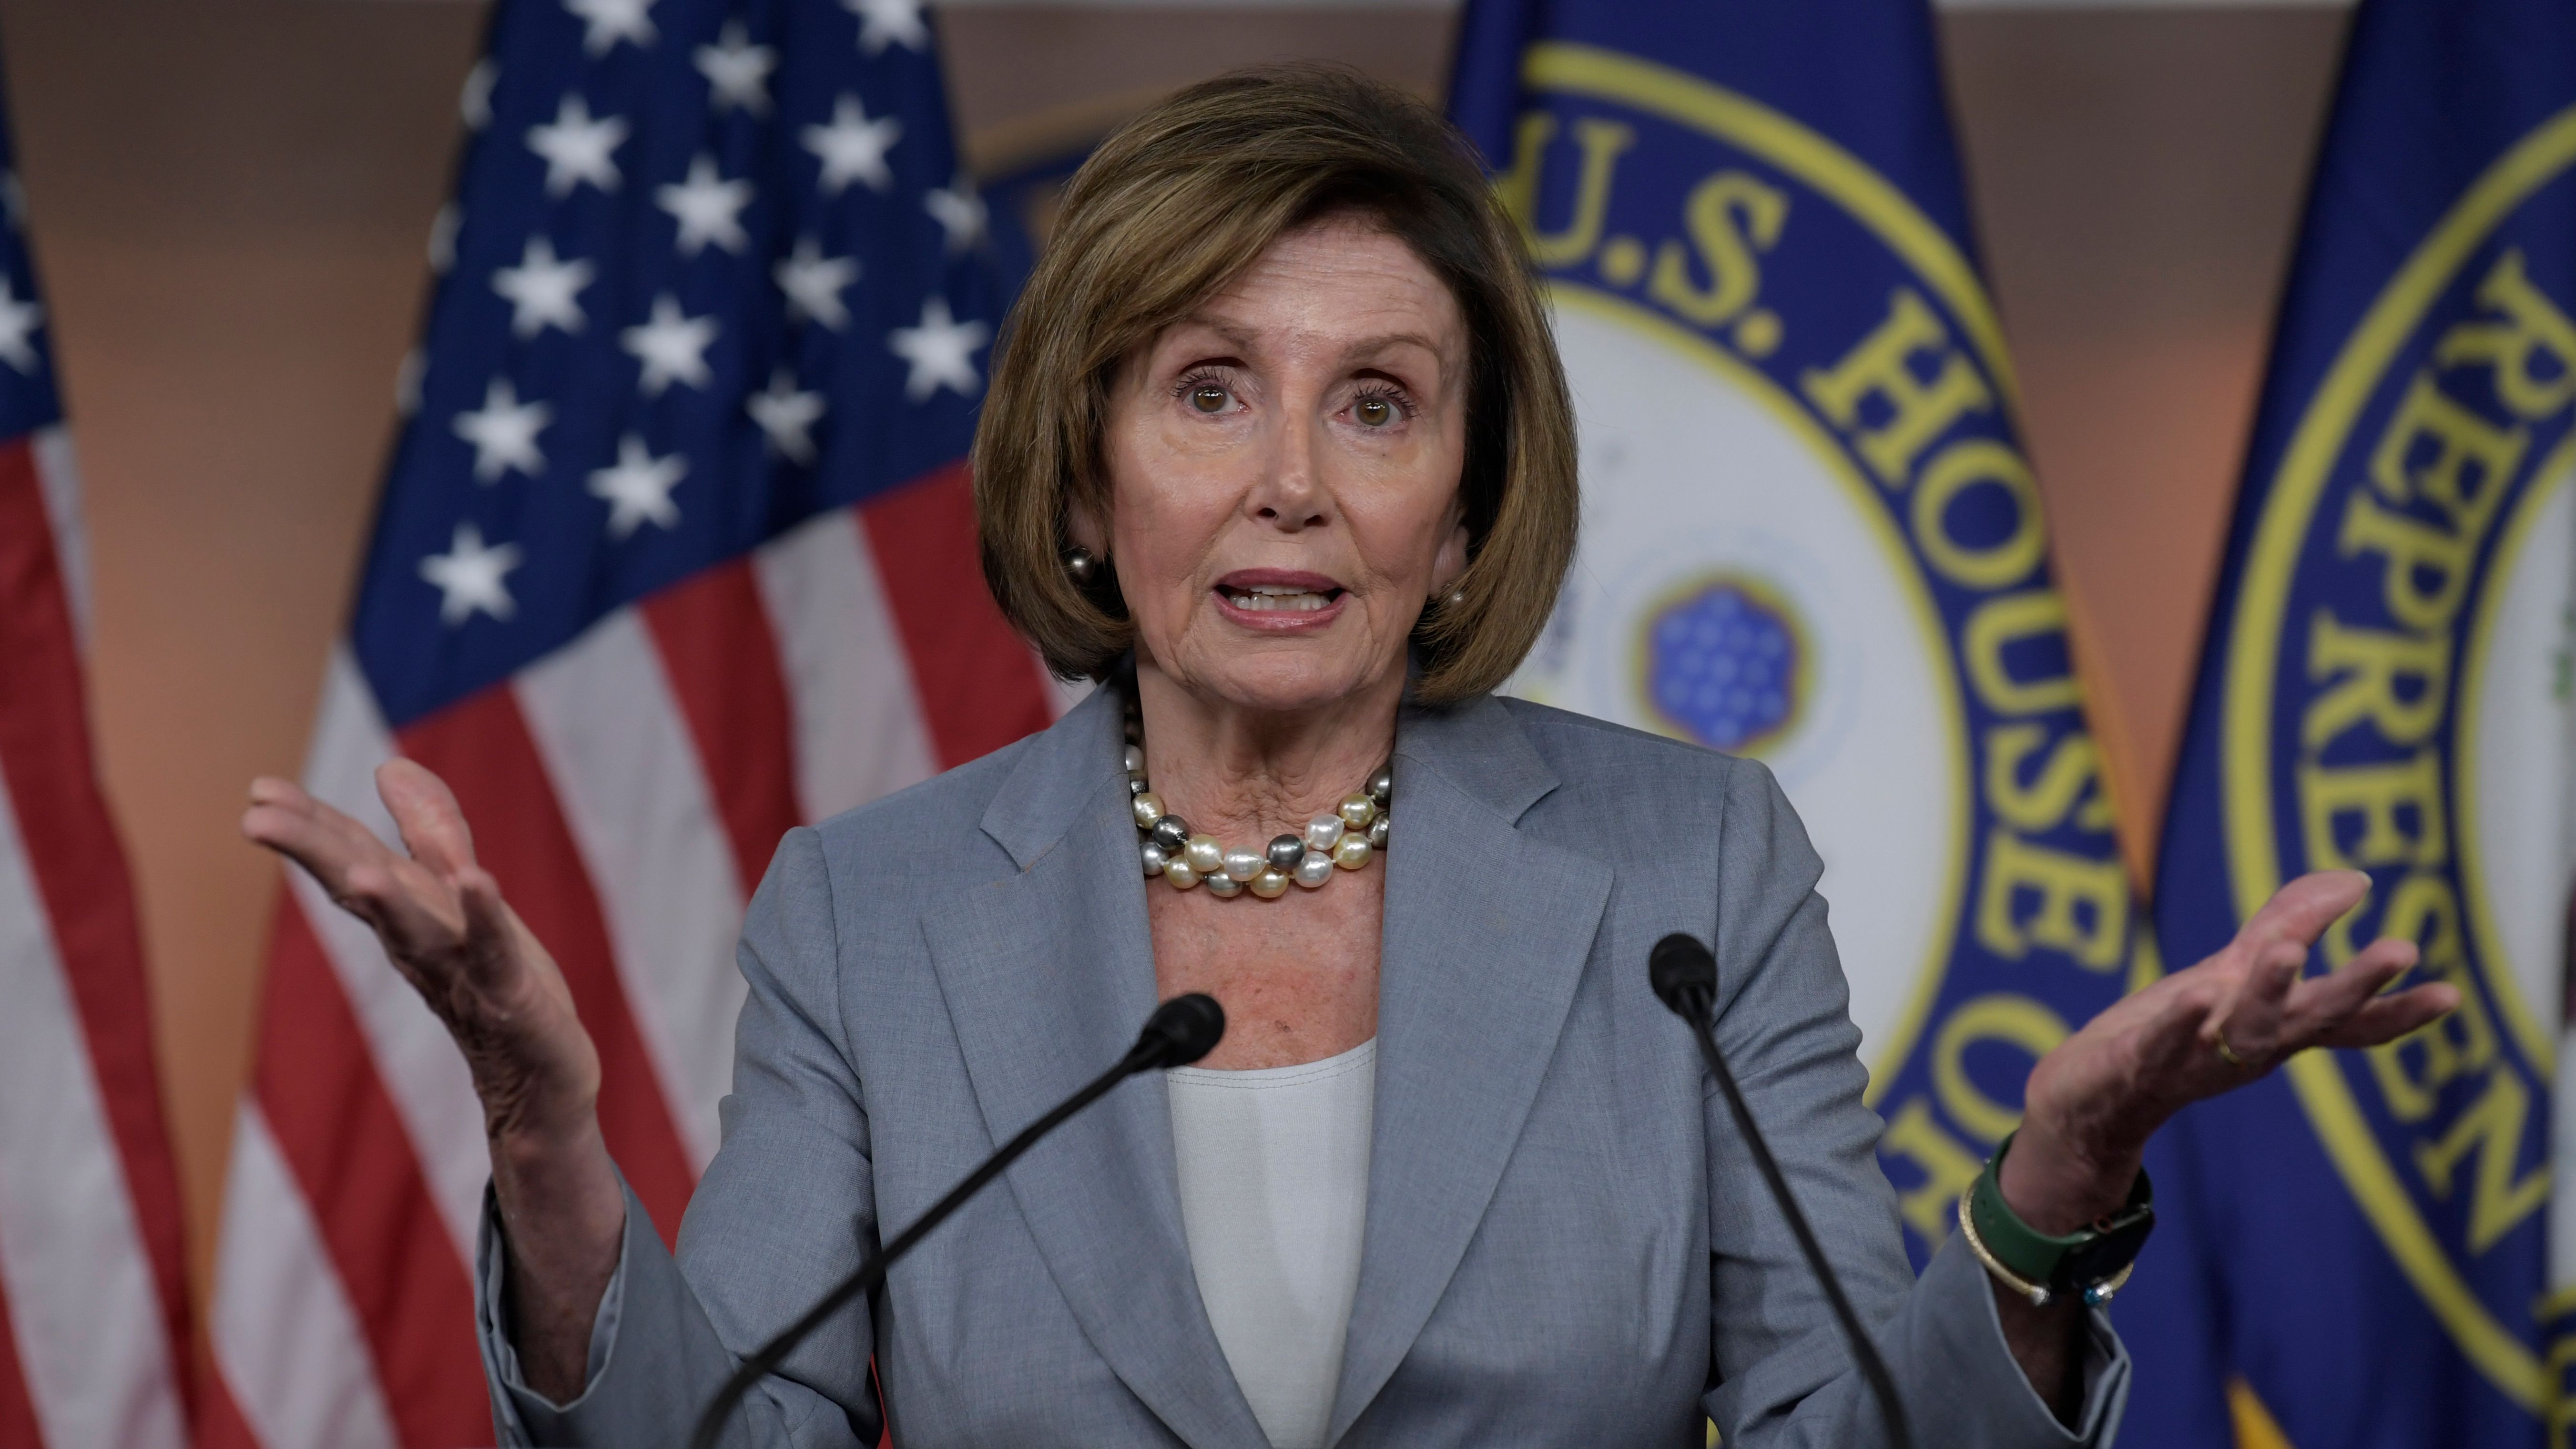 Nancy Pelosi says that the attack on her husband will affect the decision about her political future